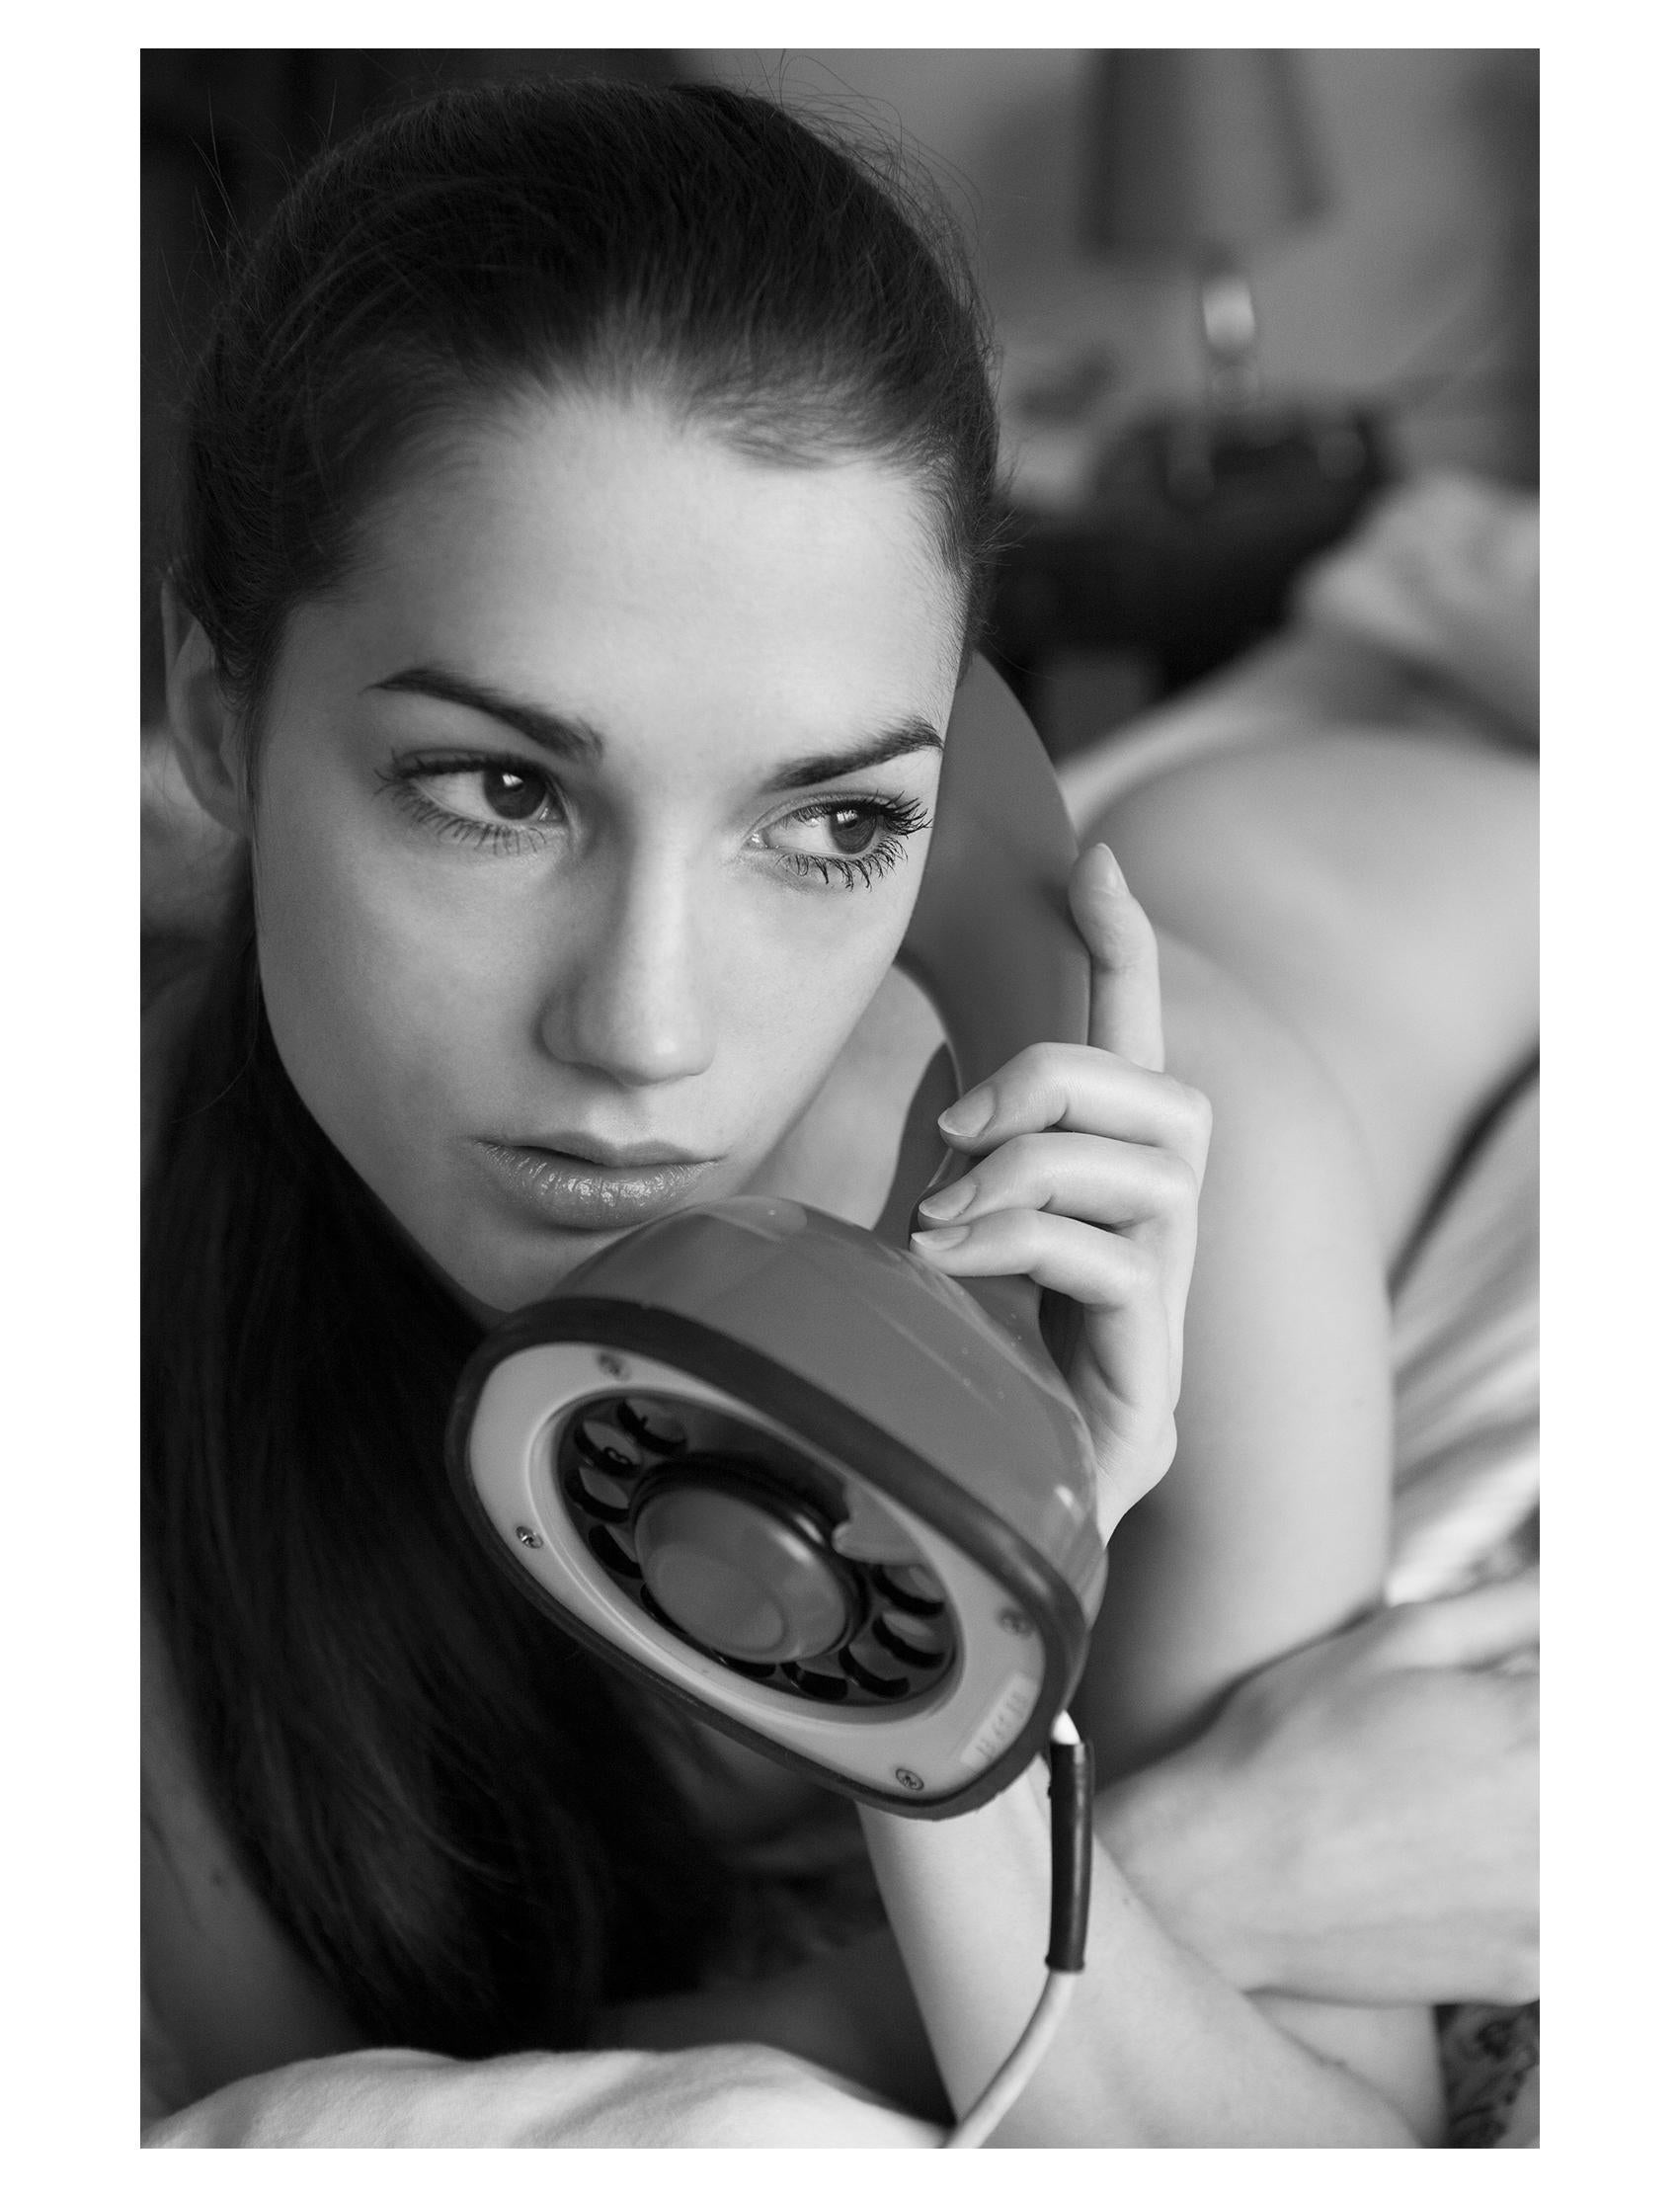 Old phone 2013 - Photograph by ALAIN DAUSSIN 